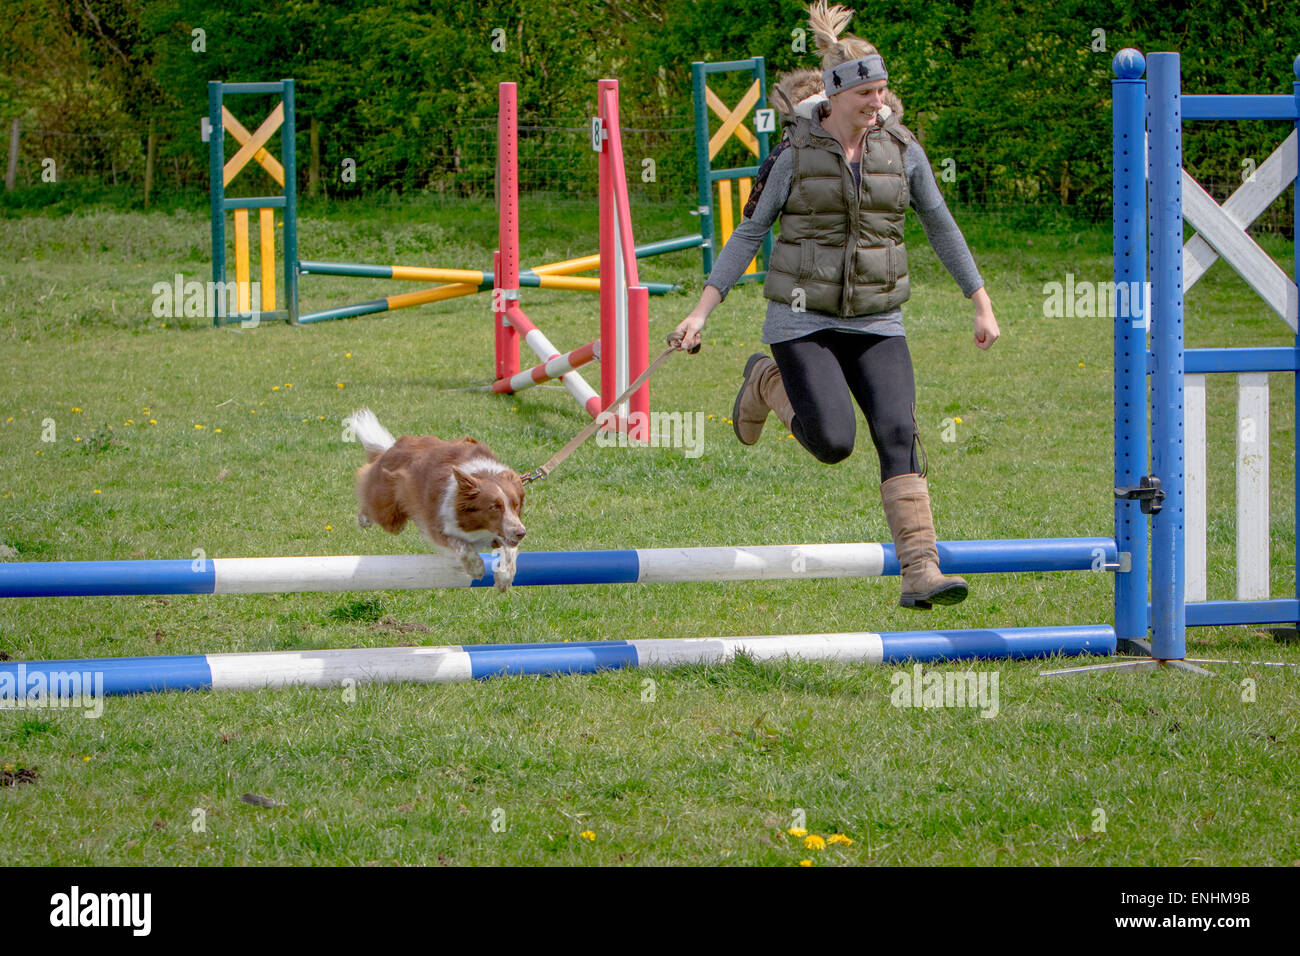 Dogs and their owners take part in an Alvechurch Riding Club Show in the hope that their skills can help them win prizes Stock Photo